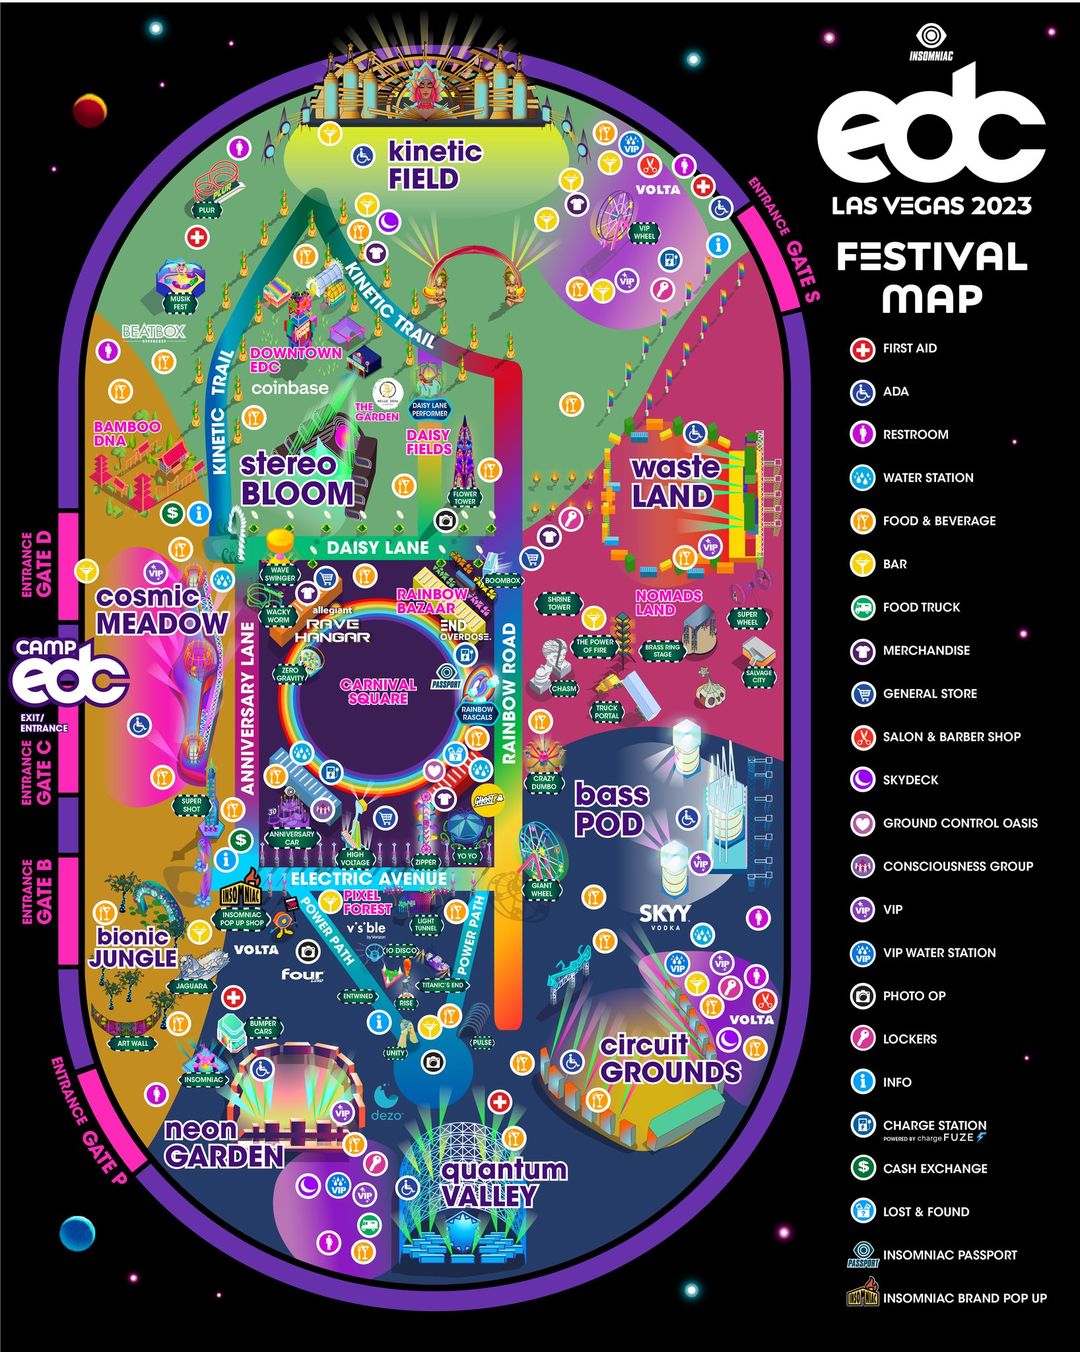 Start making EDC 2023 plans with official map and set times